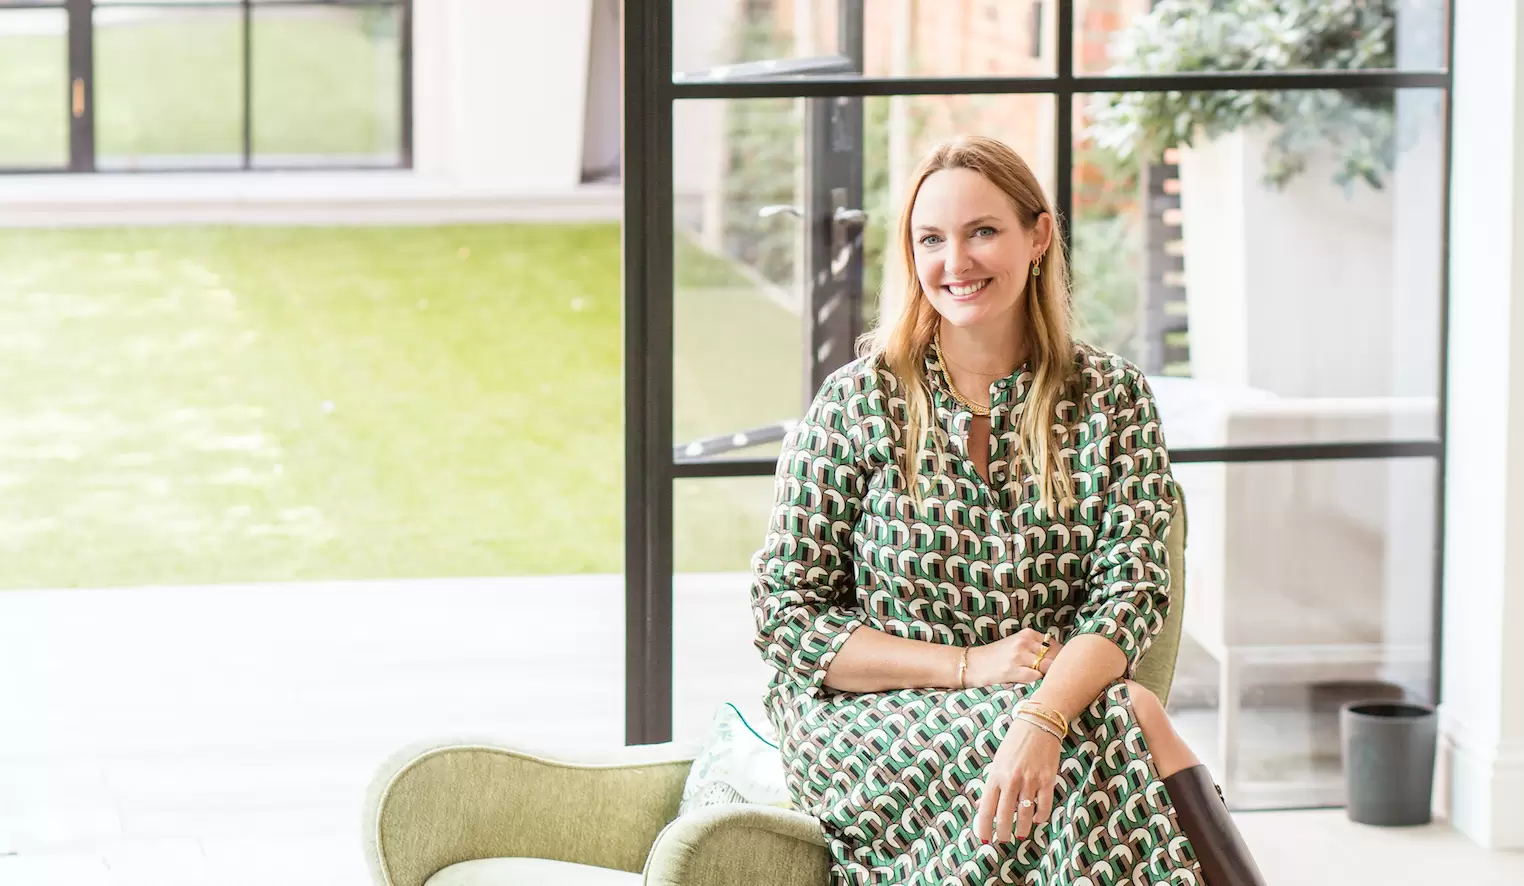 Marisa Hordern, founder of Missoma, smiling at the camera, wearing a green and brown patterned dress.